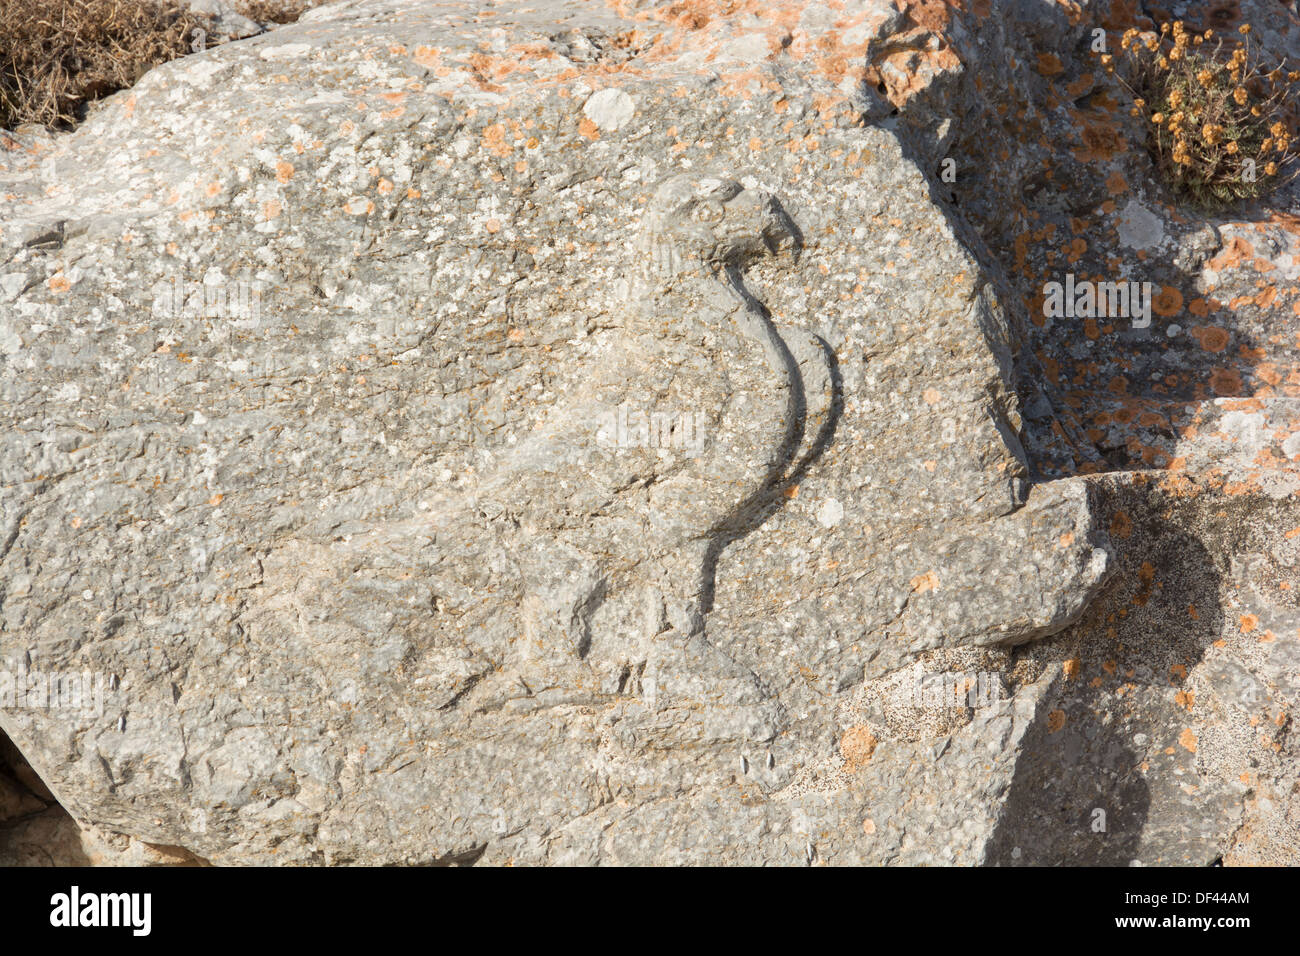 SANTORINI (THIRA), CYCLADES, GREECE. Rock carving of an eagle at the Sanctuary of Artemidoros in Ancient Thera. Stock Photo